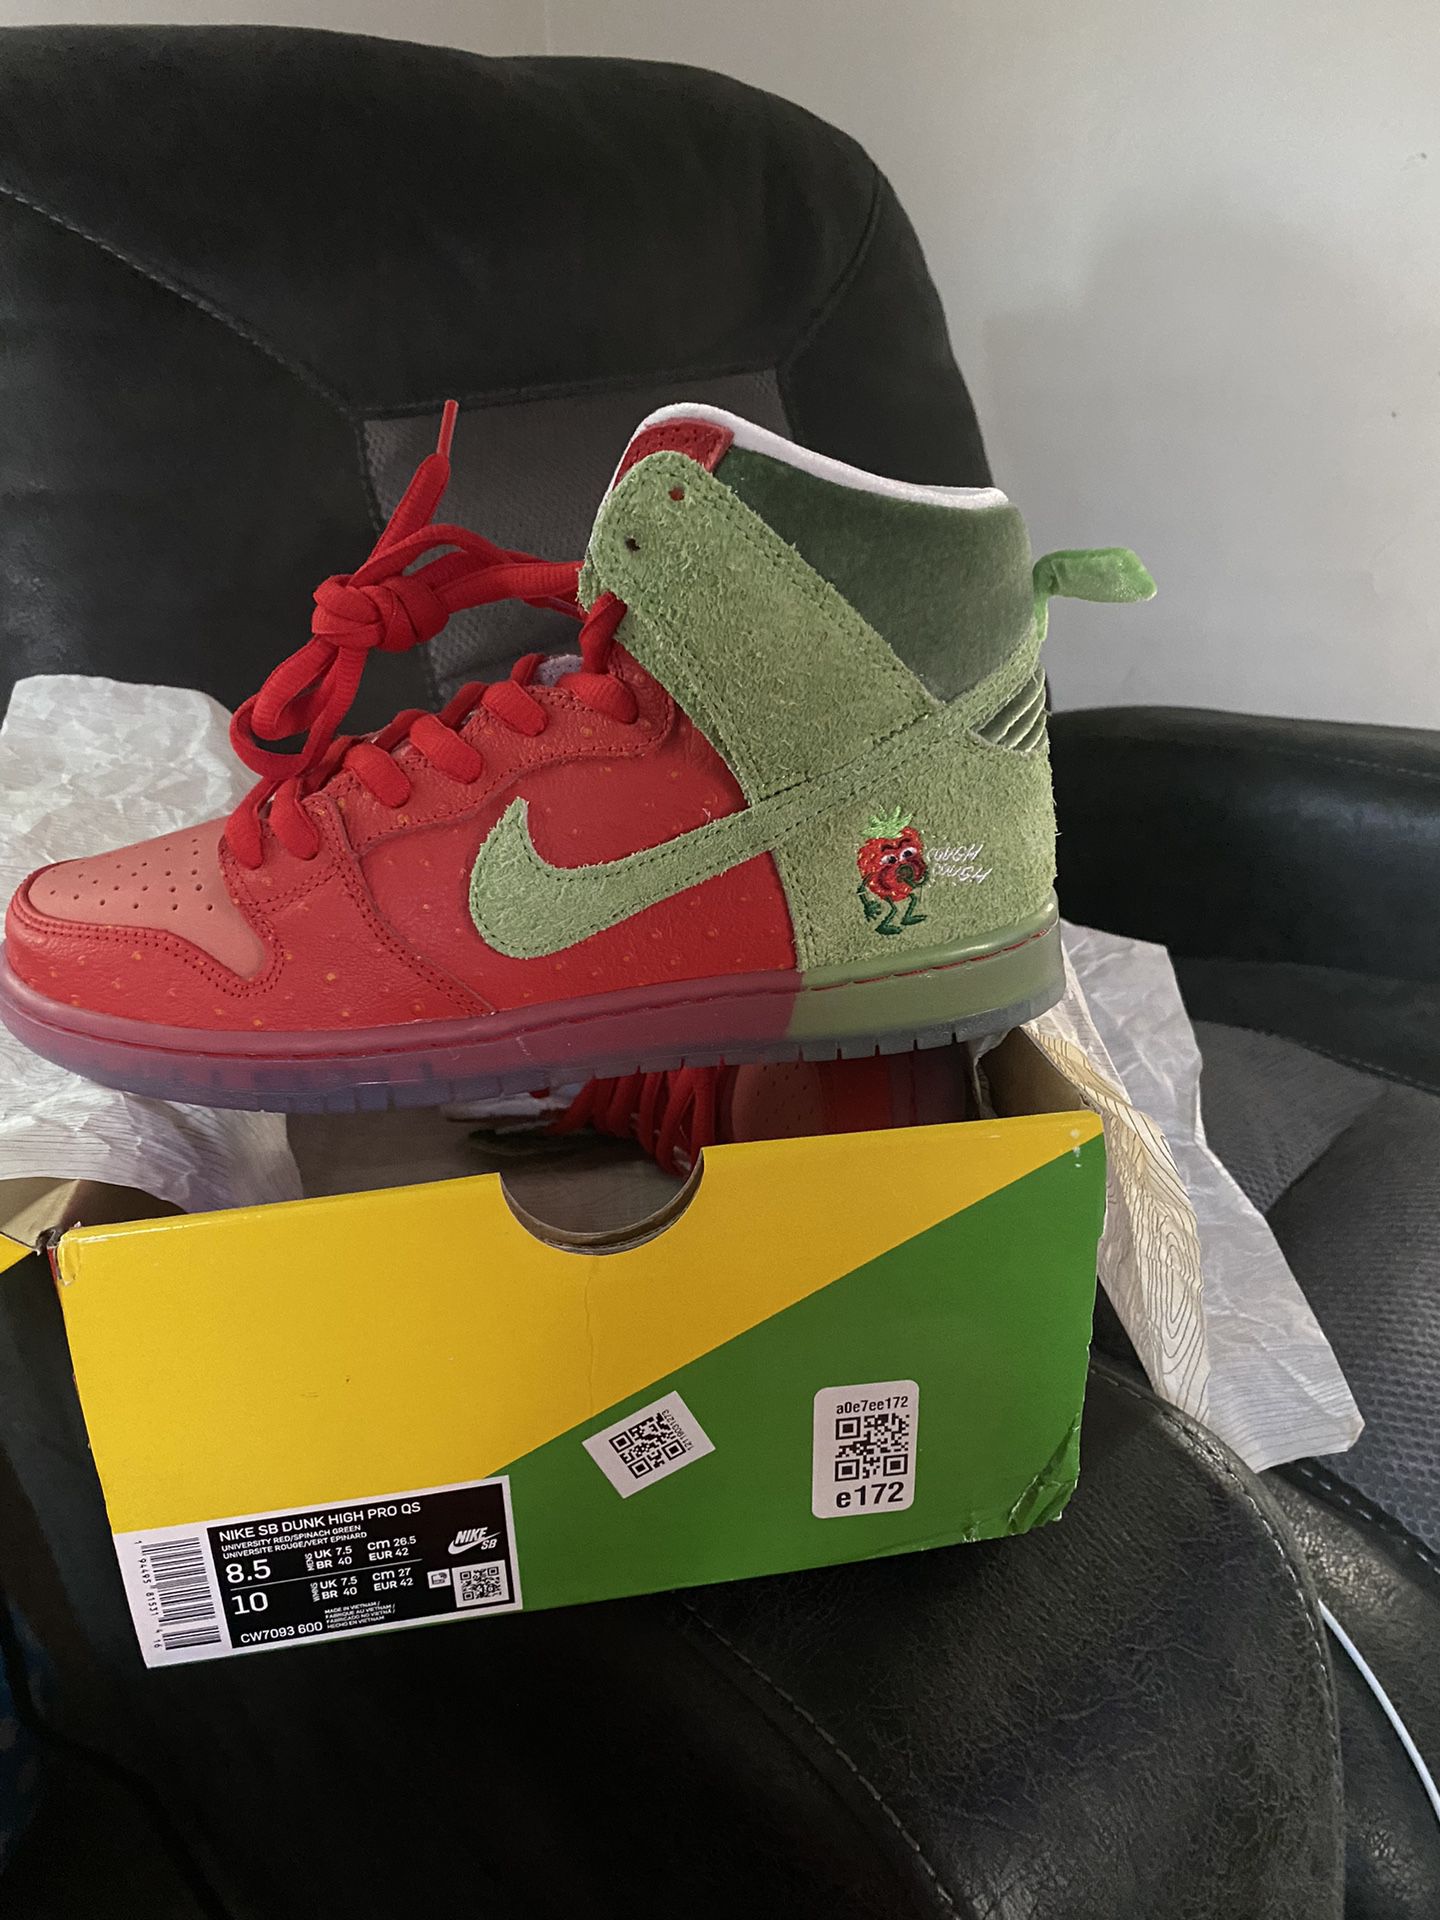 Nike SB Dunk High Pro QS for Sale in Shelton, CT - OfferUp